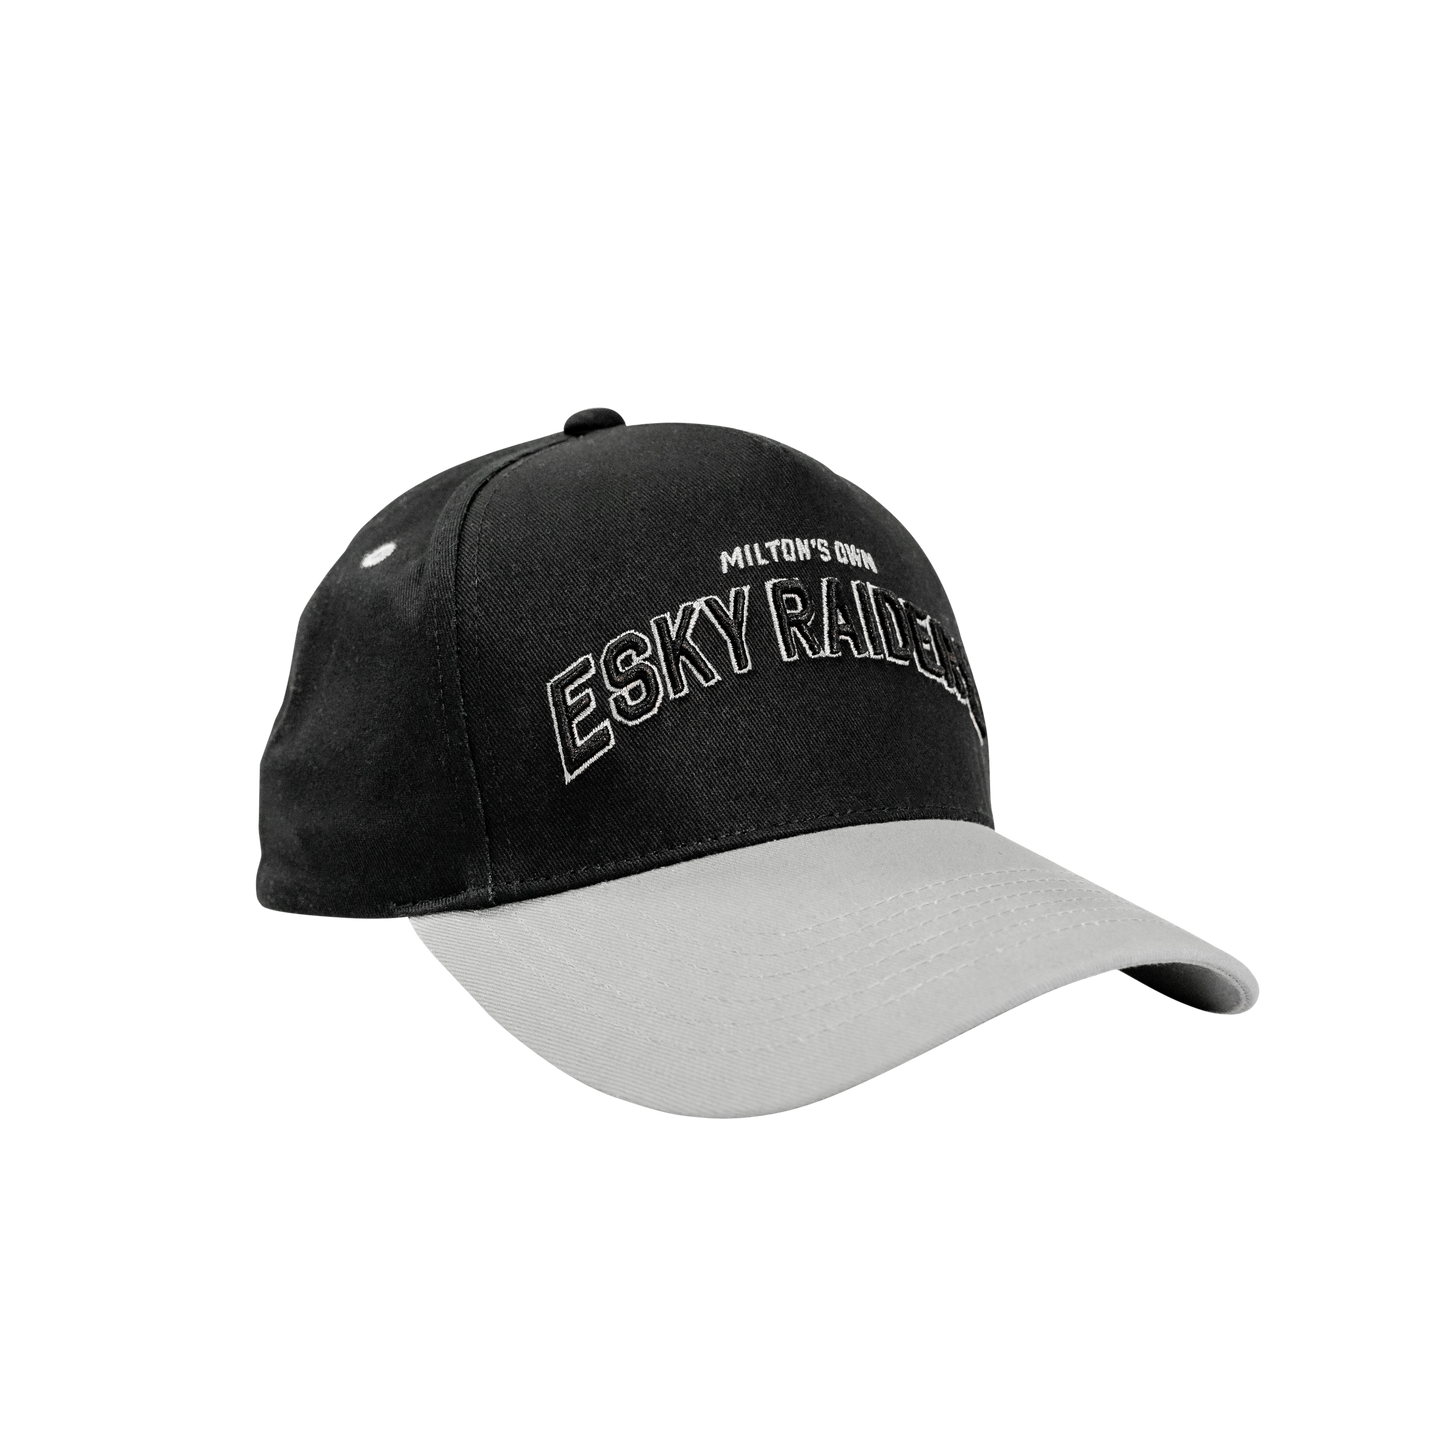 Esky Raiders Snapback - Gift With Purchase